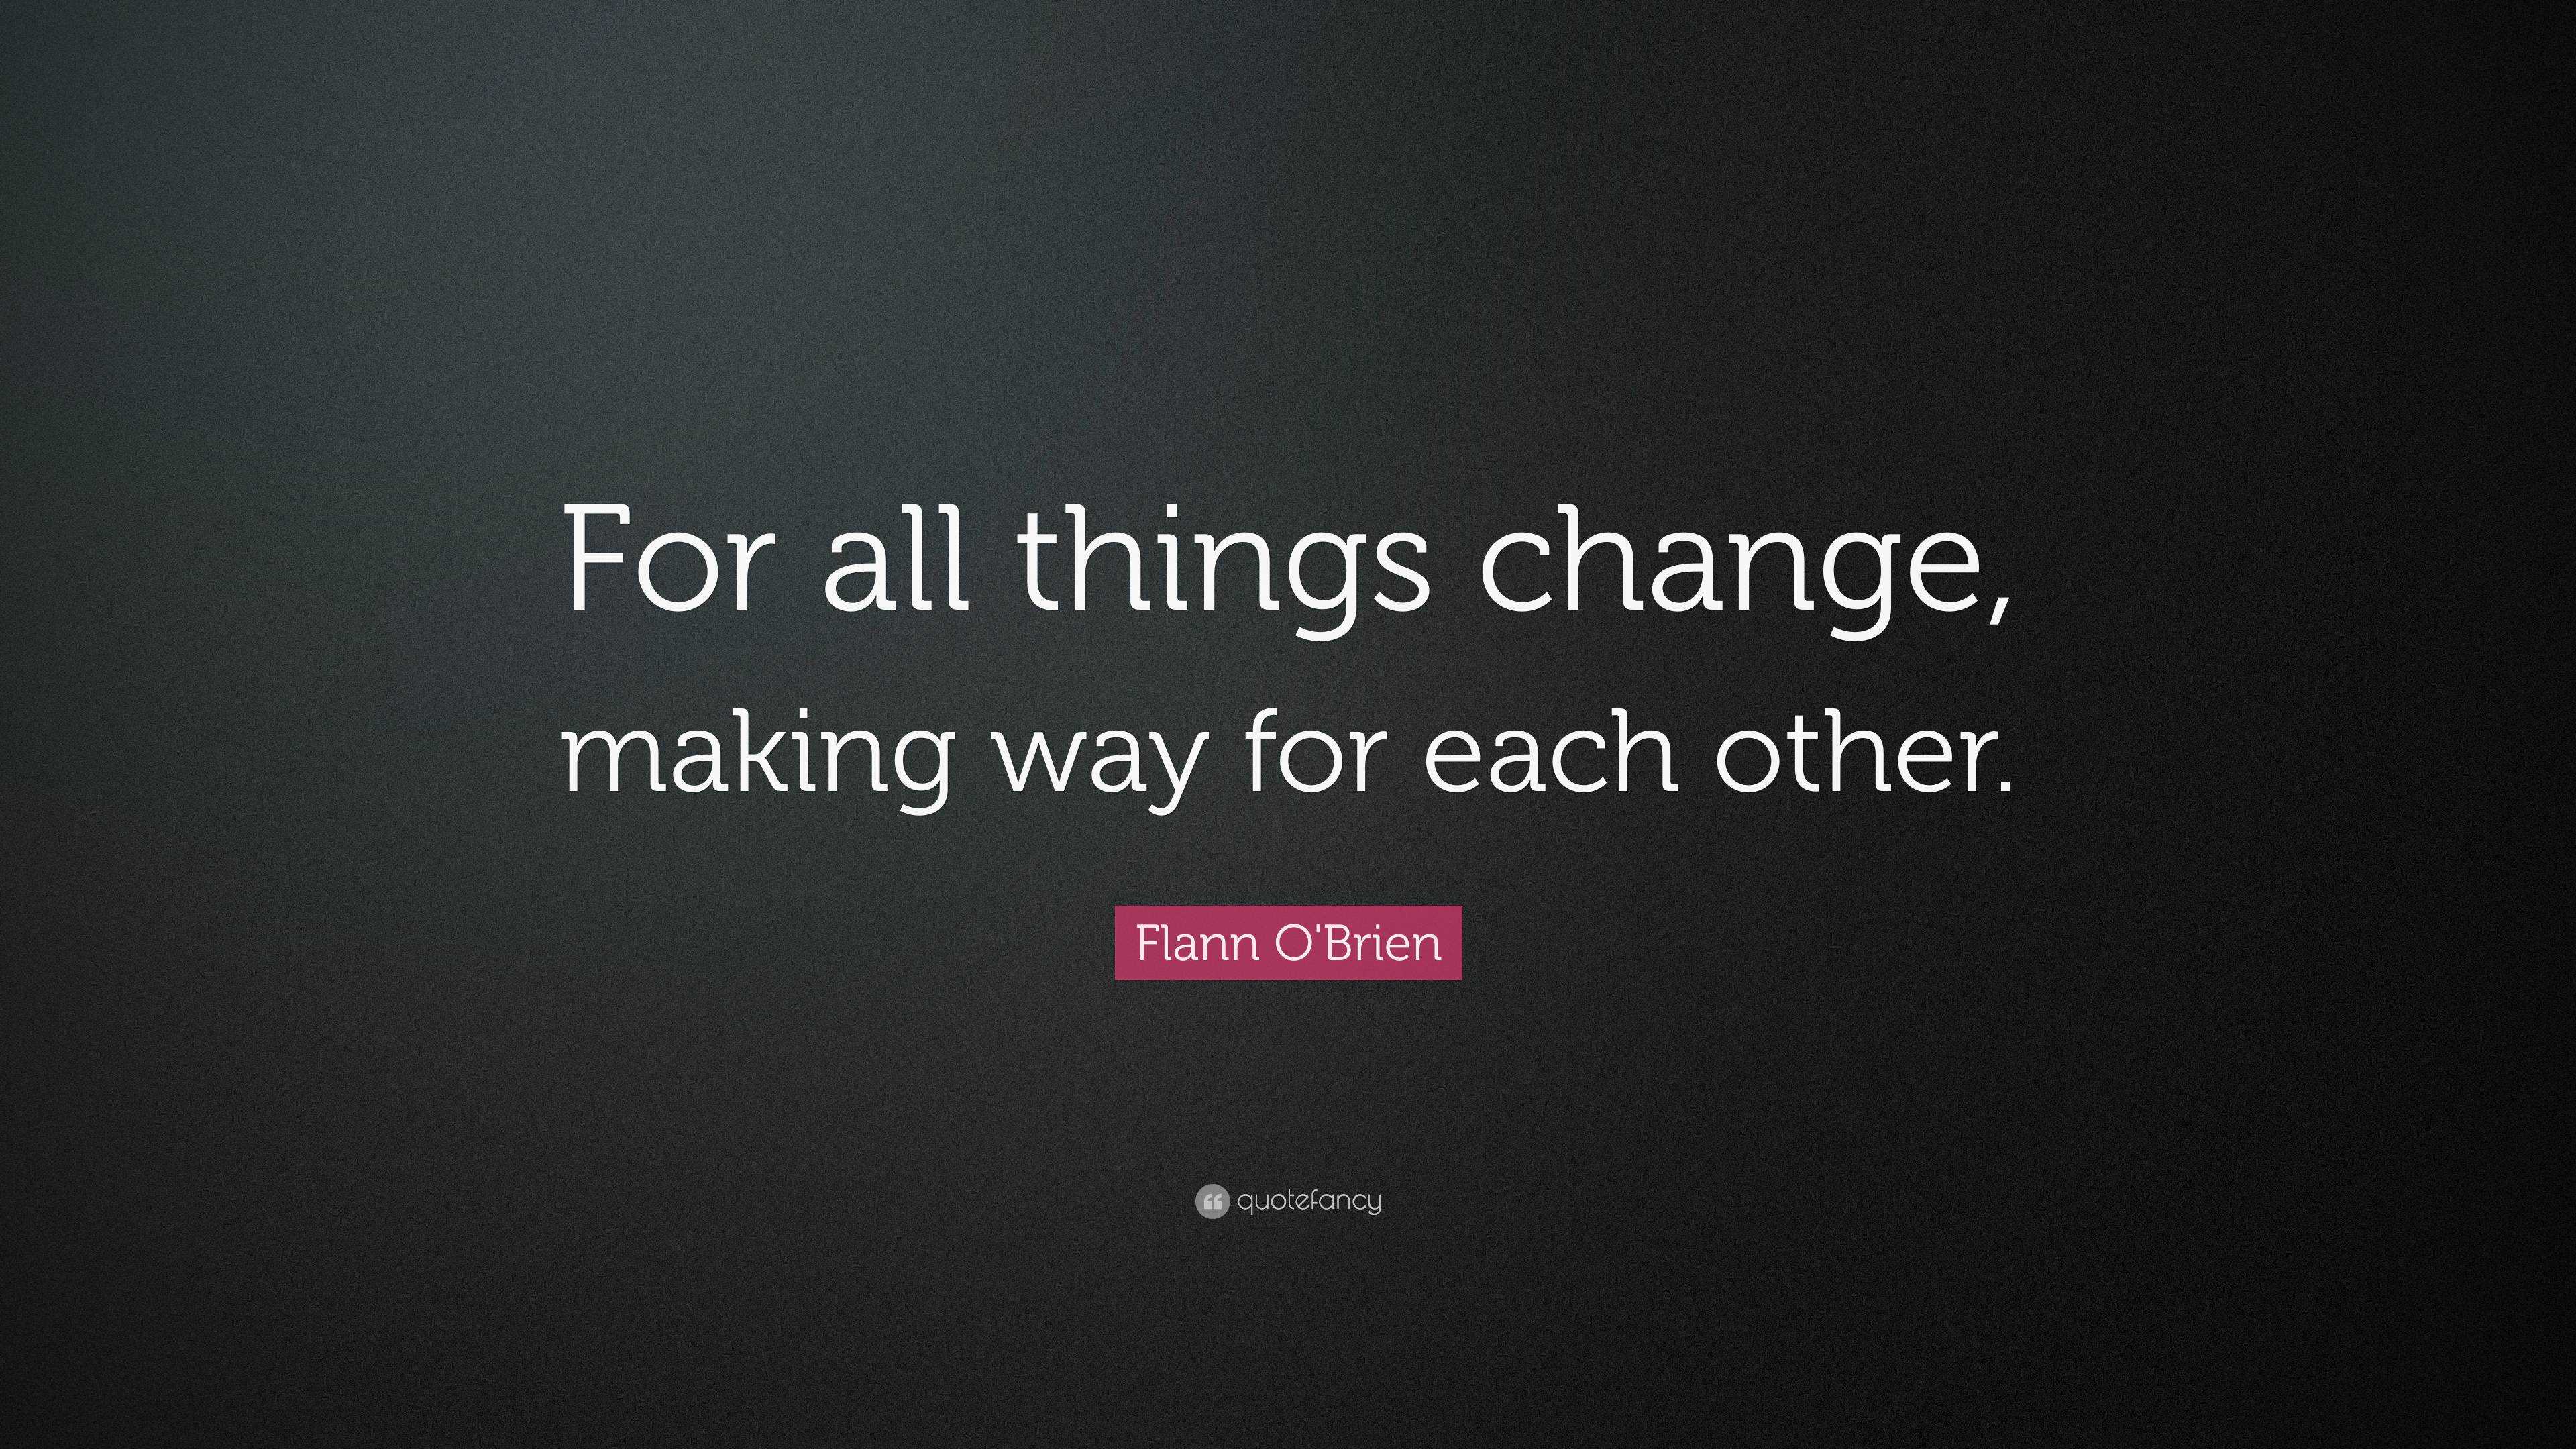 Flann O'Brien Quote: “For all things change, making way for each other.”